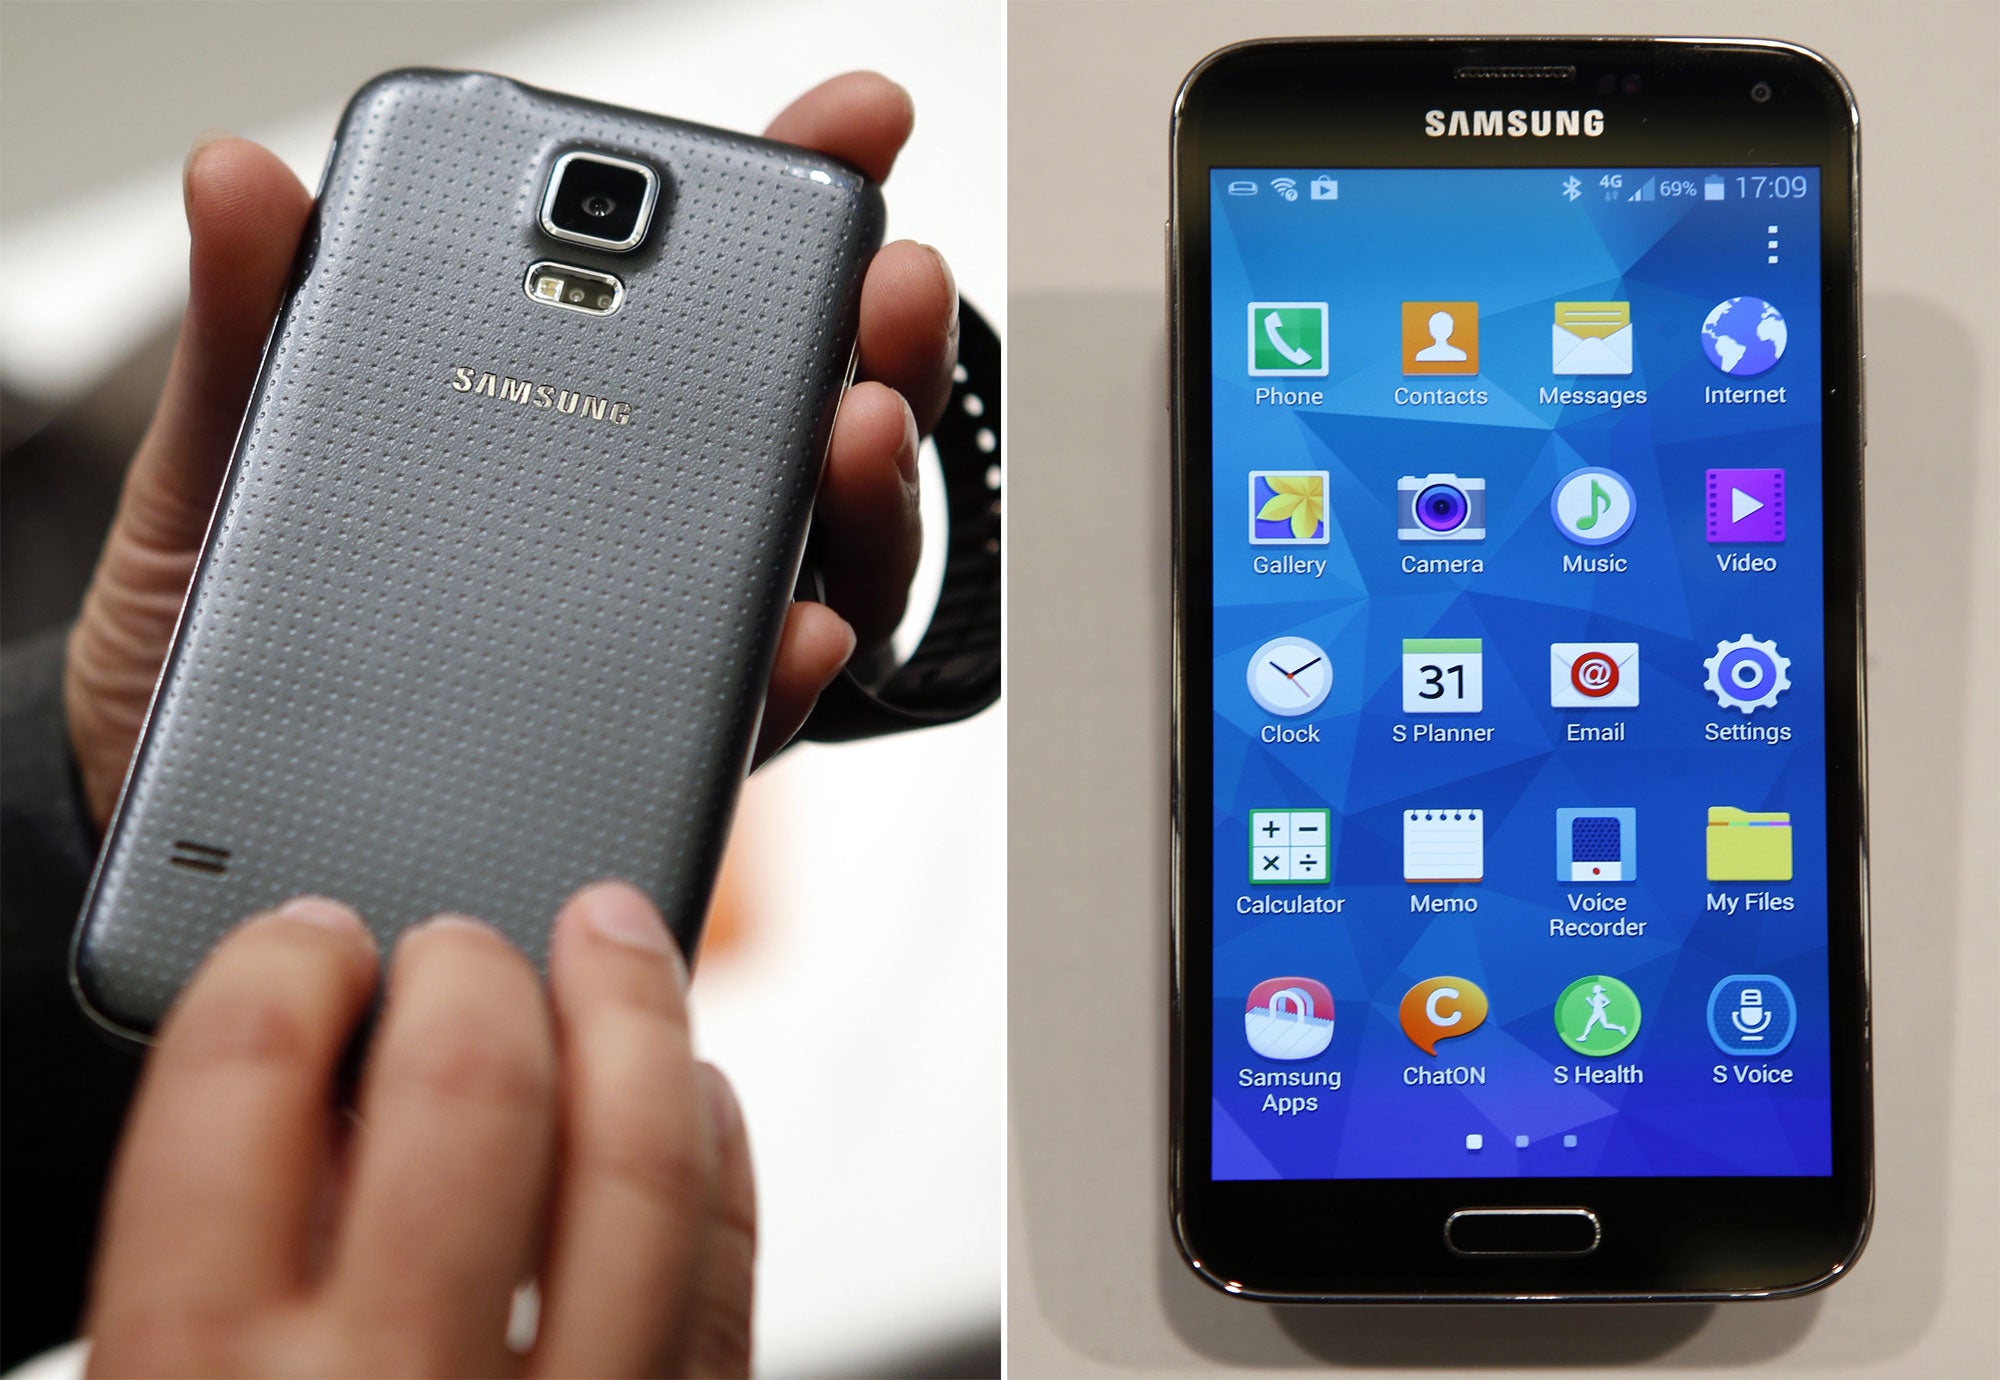 The Samsung S5 comes with a new, imitation-leather back - but it's business as usual for the user interface.